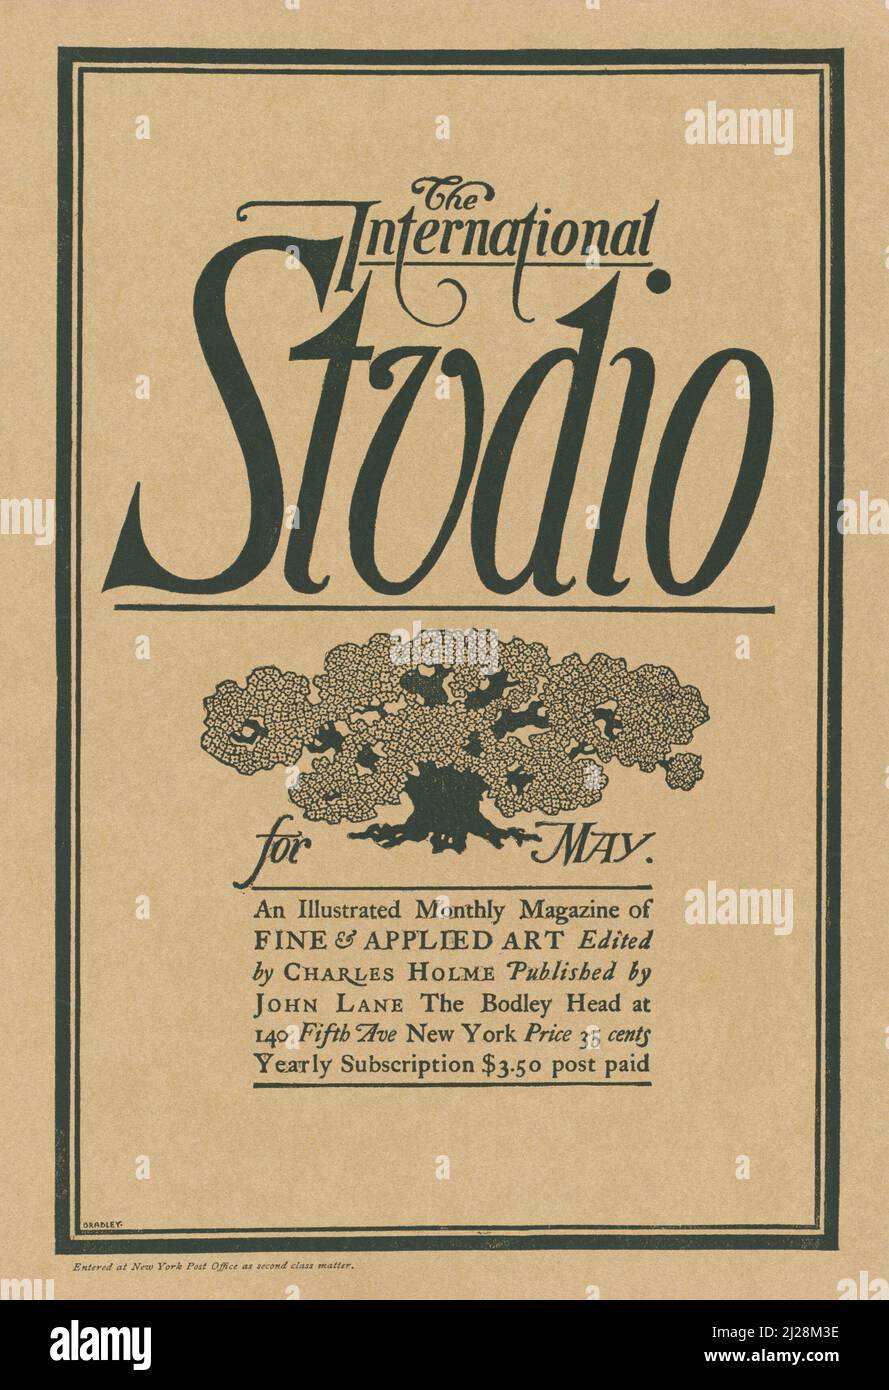 Will Bradley artwork - The international studio for May, May 1897 (1897) American Art Nouveau - Old and vintage poster / Magazine cover. Stock Photo